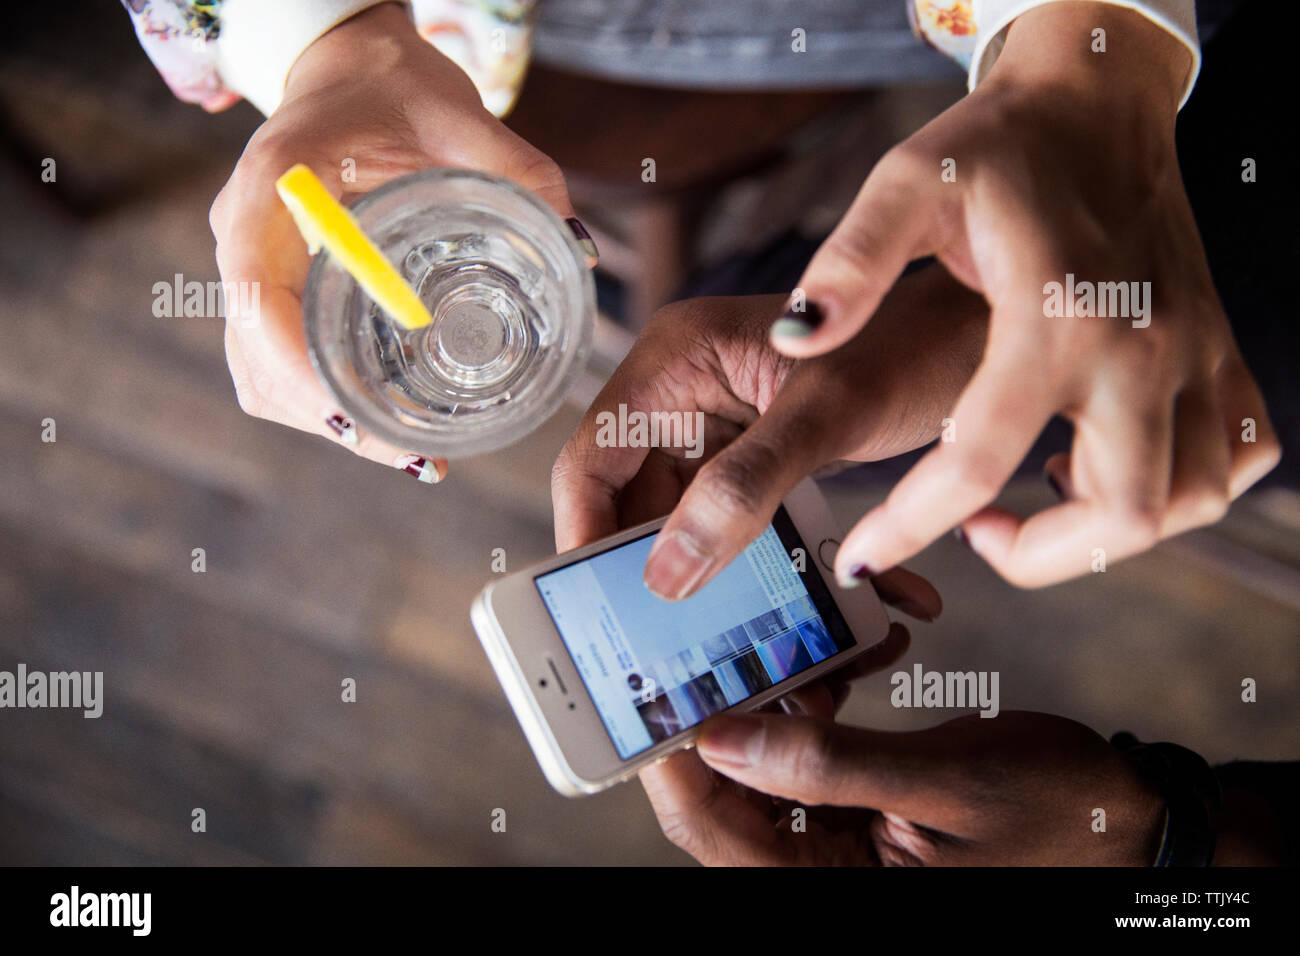 High angle view of friends using smart phone Stock Photo